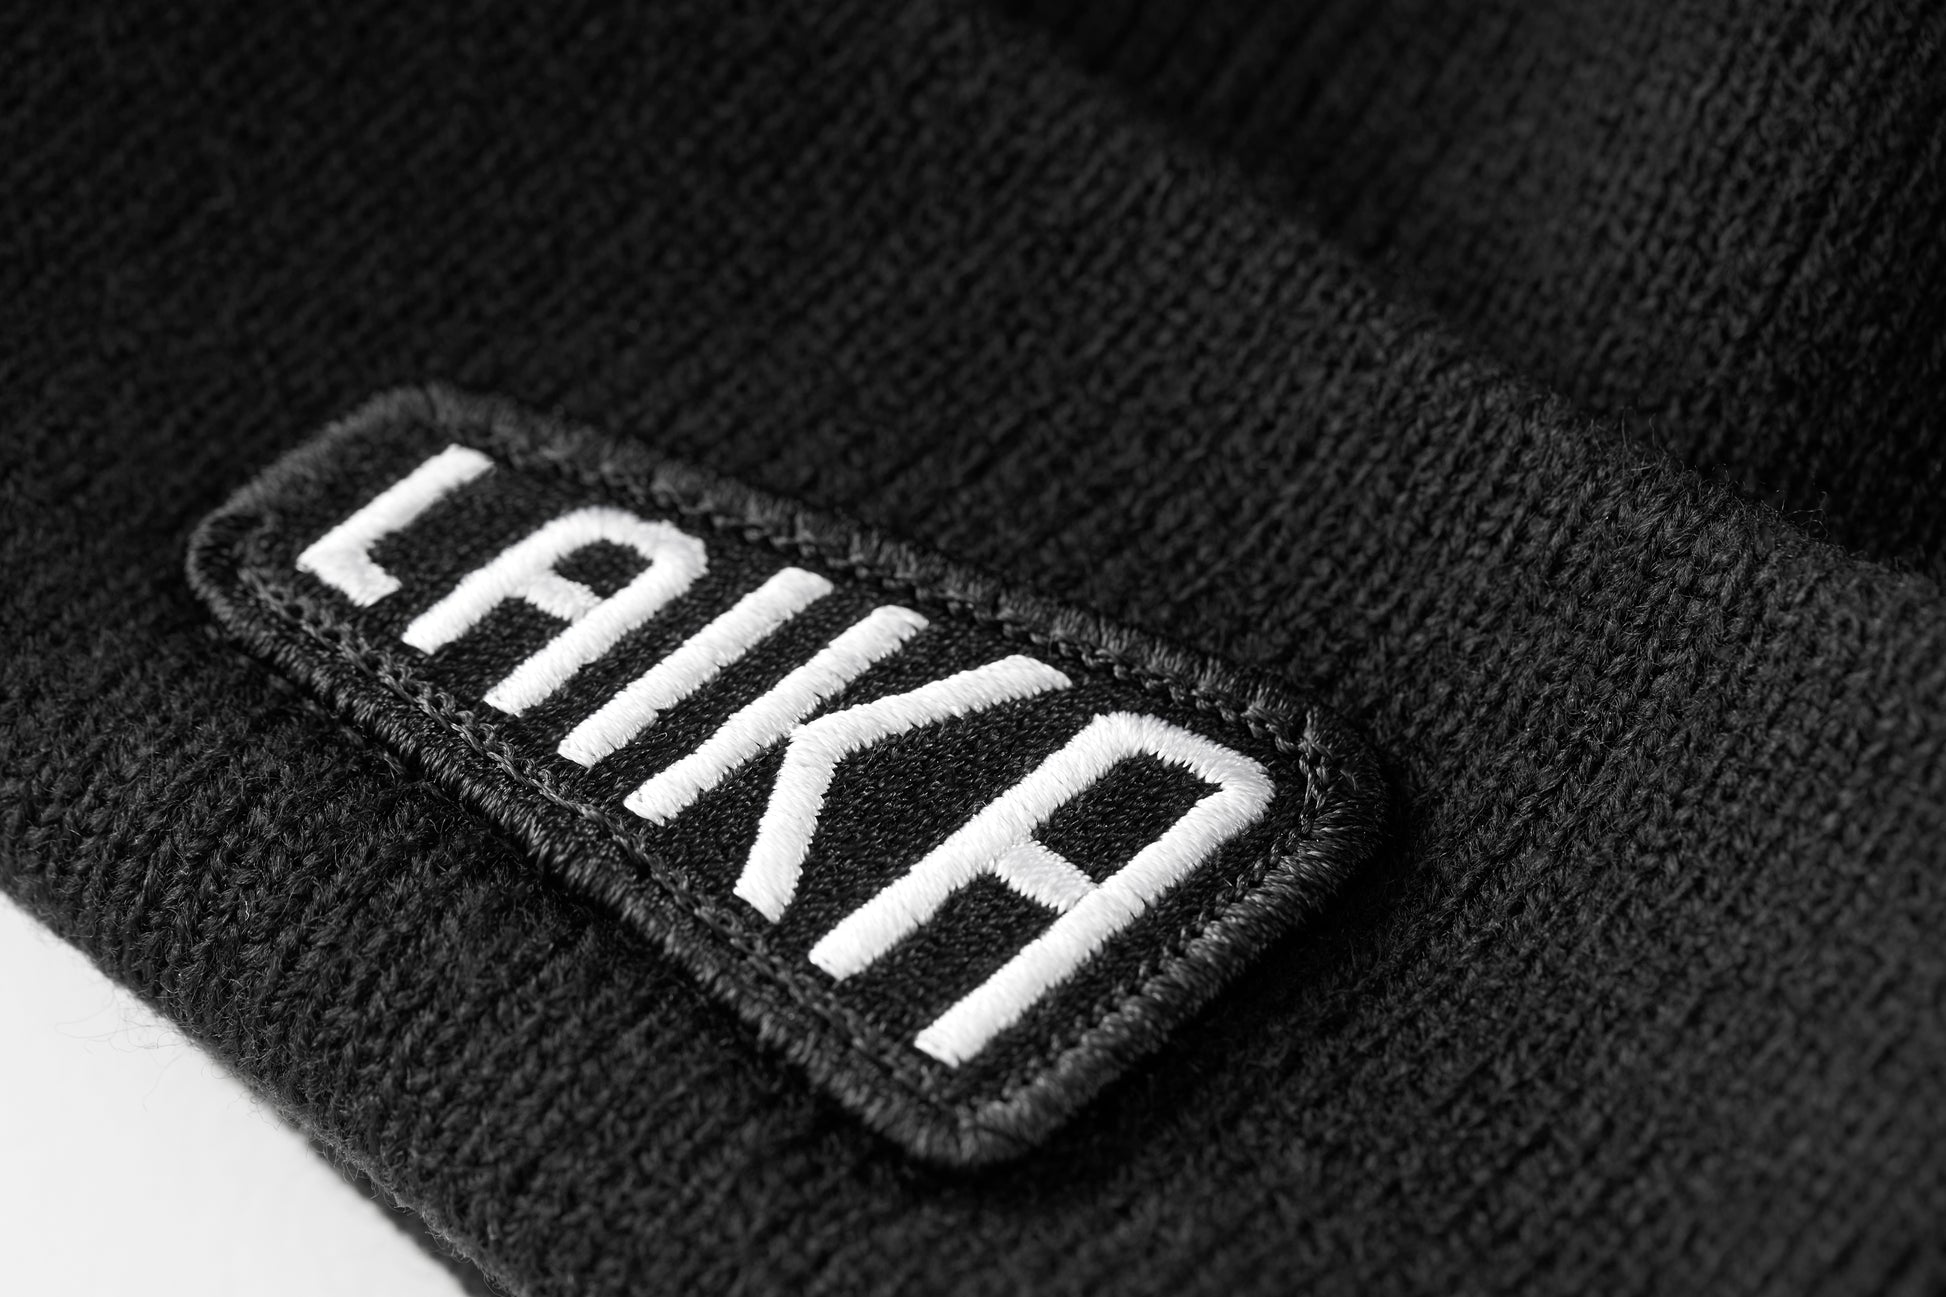 Shop at LAIKA's online store! Upgrade your winter attire with our 100%  acrylic and logo-inspired Chunky Knit Beanie Hat. – The LAIKA Shop